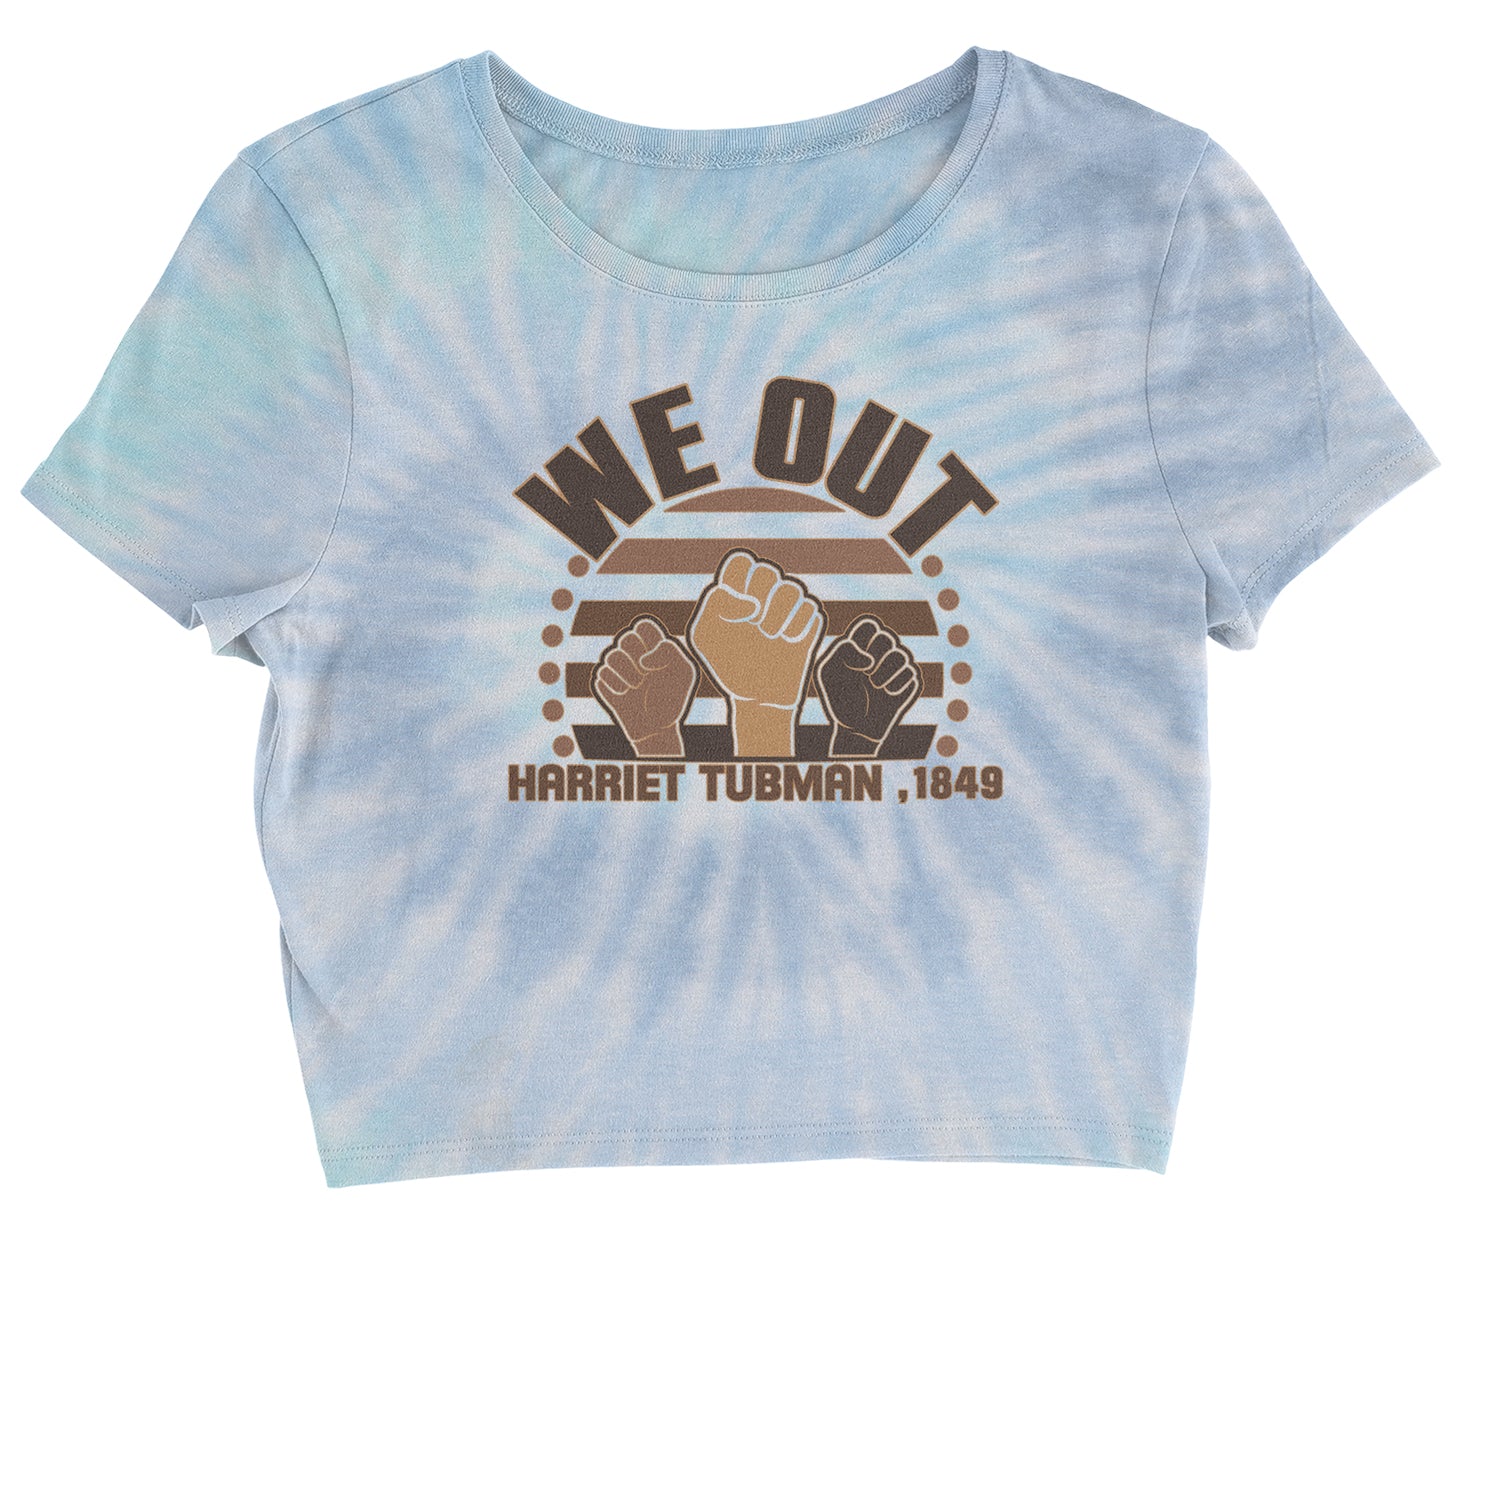 We Out Harriet Tubman Raised Fists BLM Cropped T-Shirt african, american, black, blm, harriet, harriett, lives, matter, out, shirt, tubman, we by Expression Tees